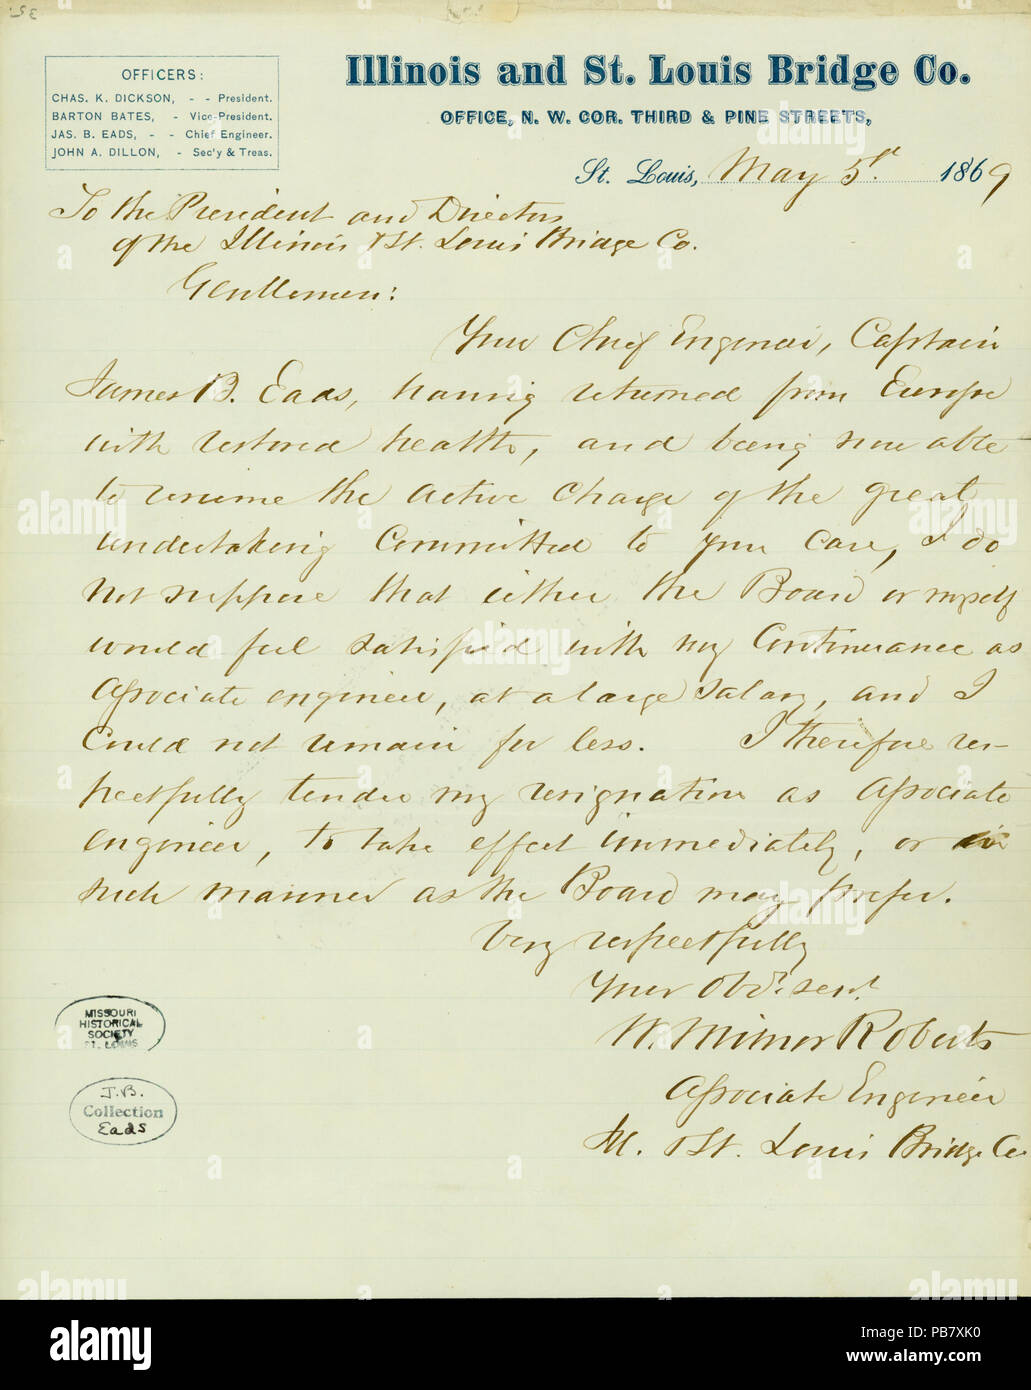 913 Letter signed W. Milner Roberts, St. Louis, to the President and Directors of the Illinois and St. Louis Bridge Co., May 5, 1869 Stock Photo